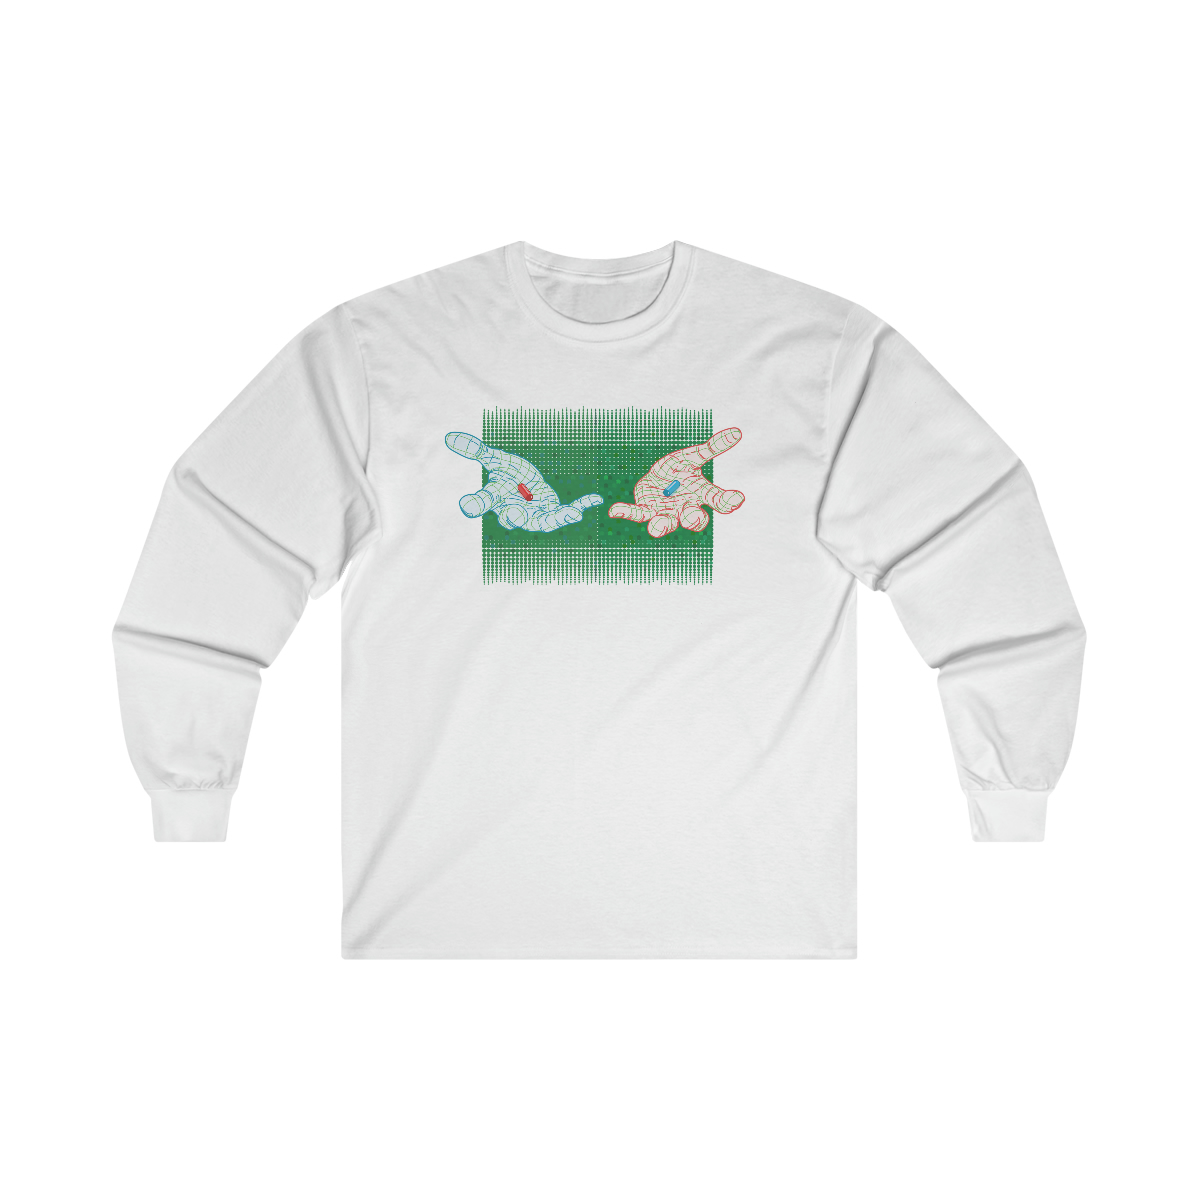 Two Hands (green) - Unisex Ultra Cotton Long Sleeve Tee